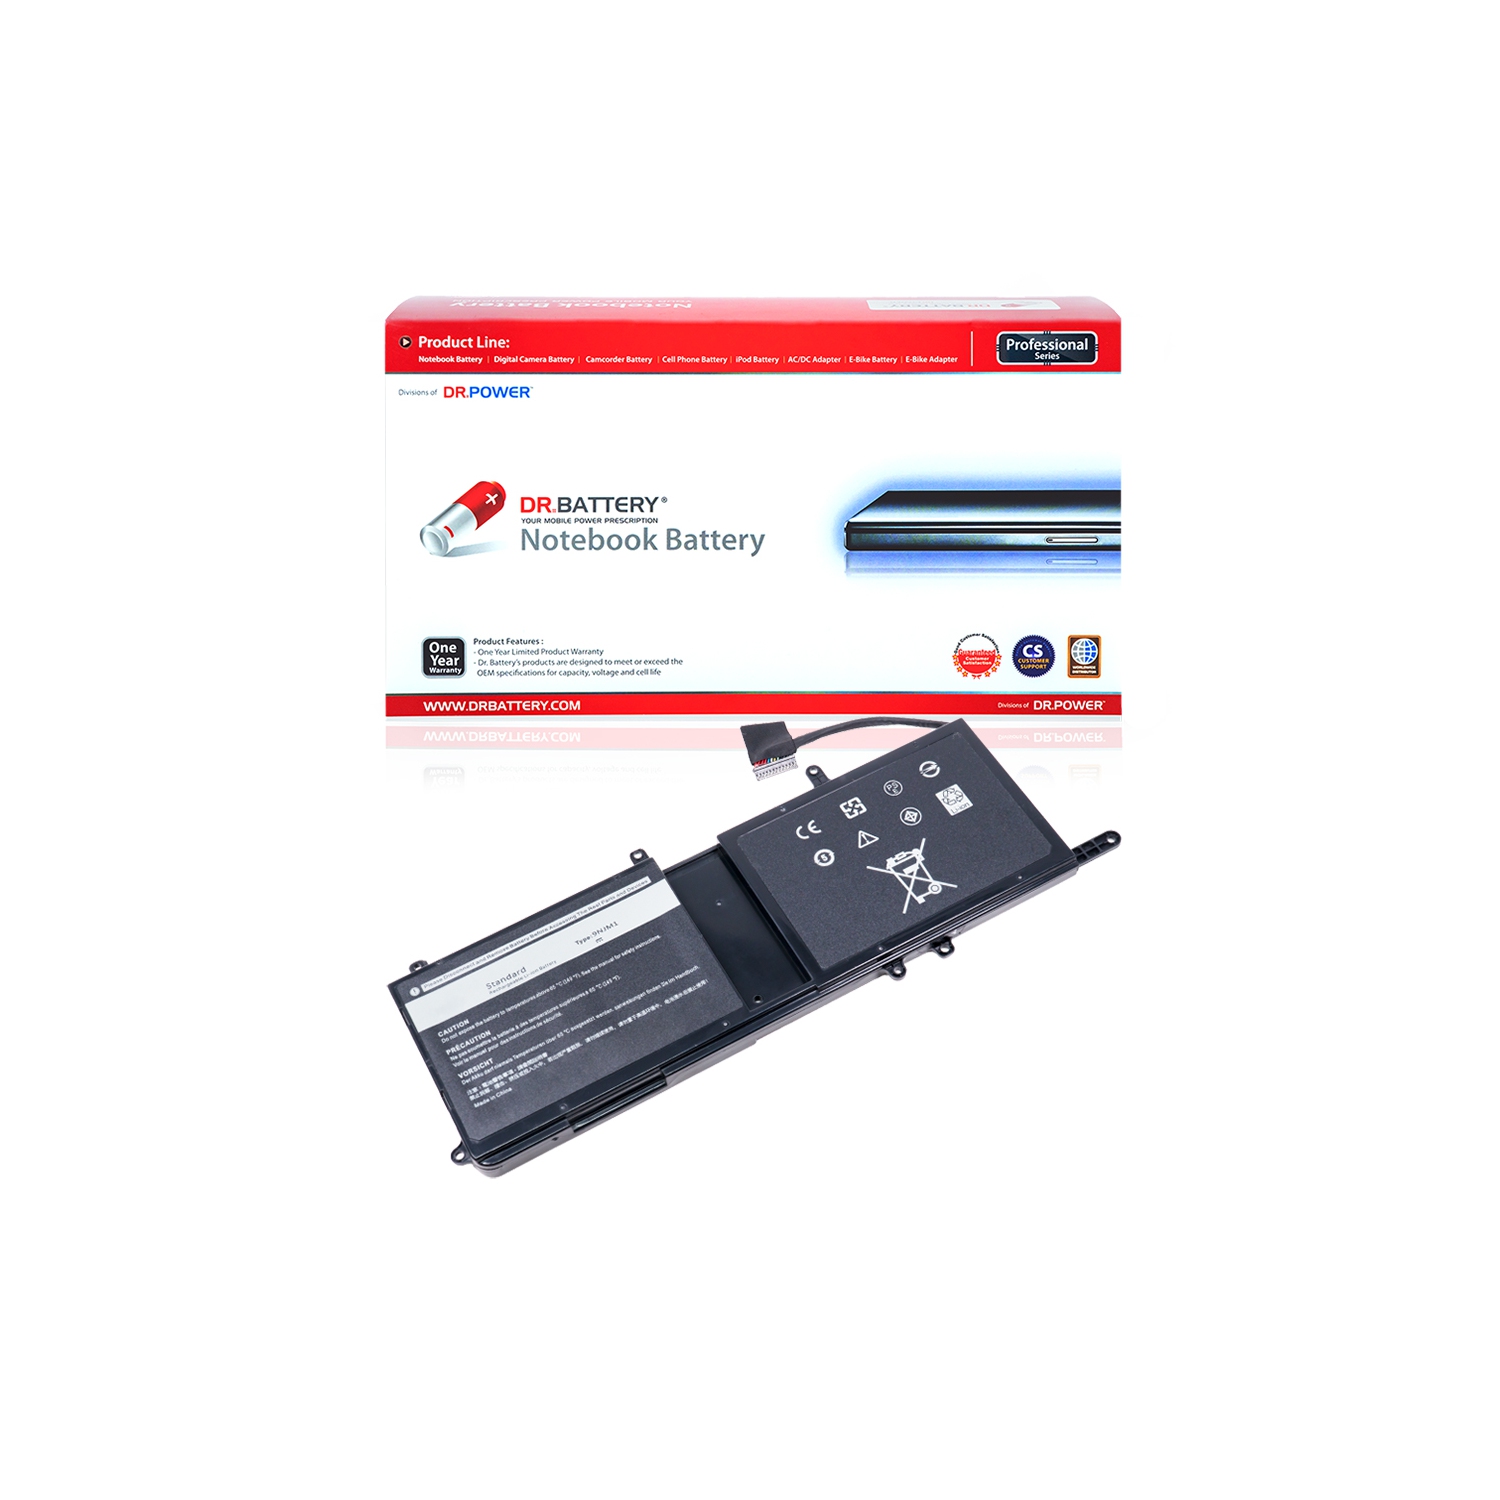 DR. BATTERY - Replacement for Dell Alienware 15 17 ALW17C-D3739B / 17 ALW17C-D3739S / 17 ALW17C-D3748B / 0MG2YH / 44T2R